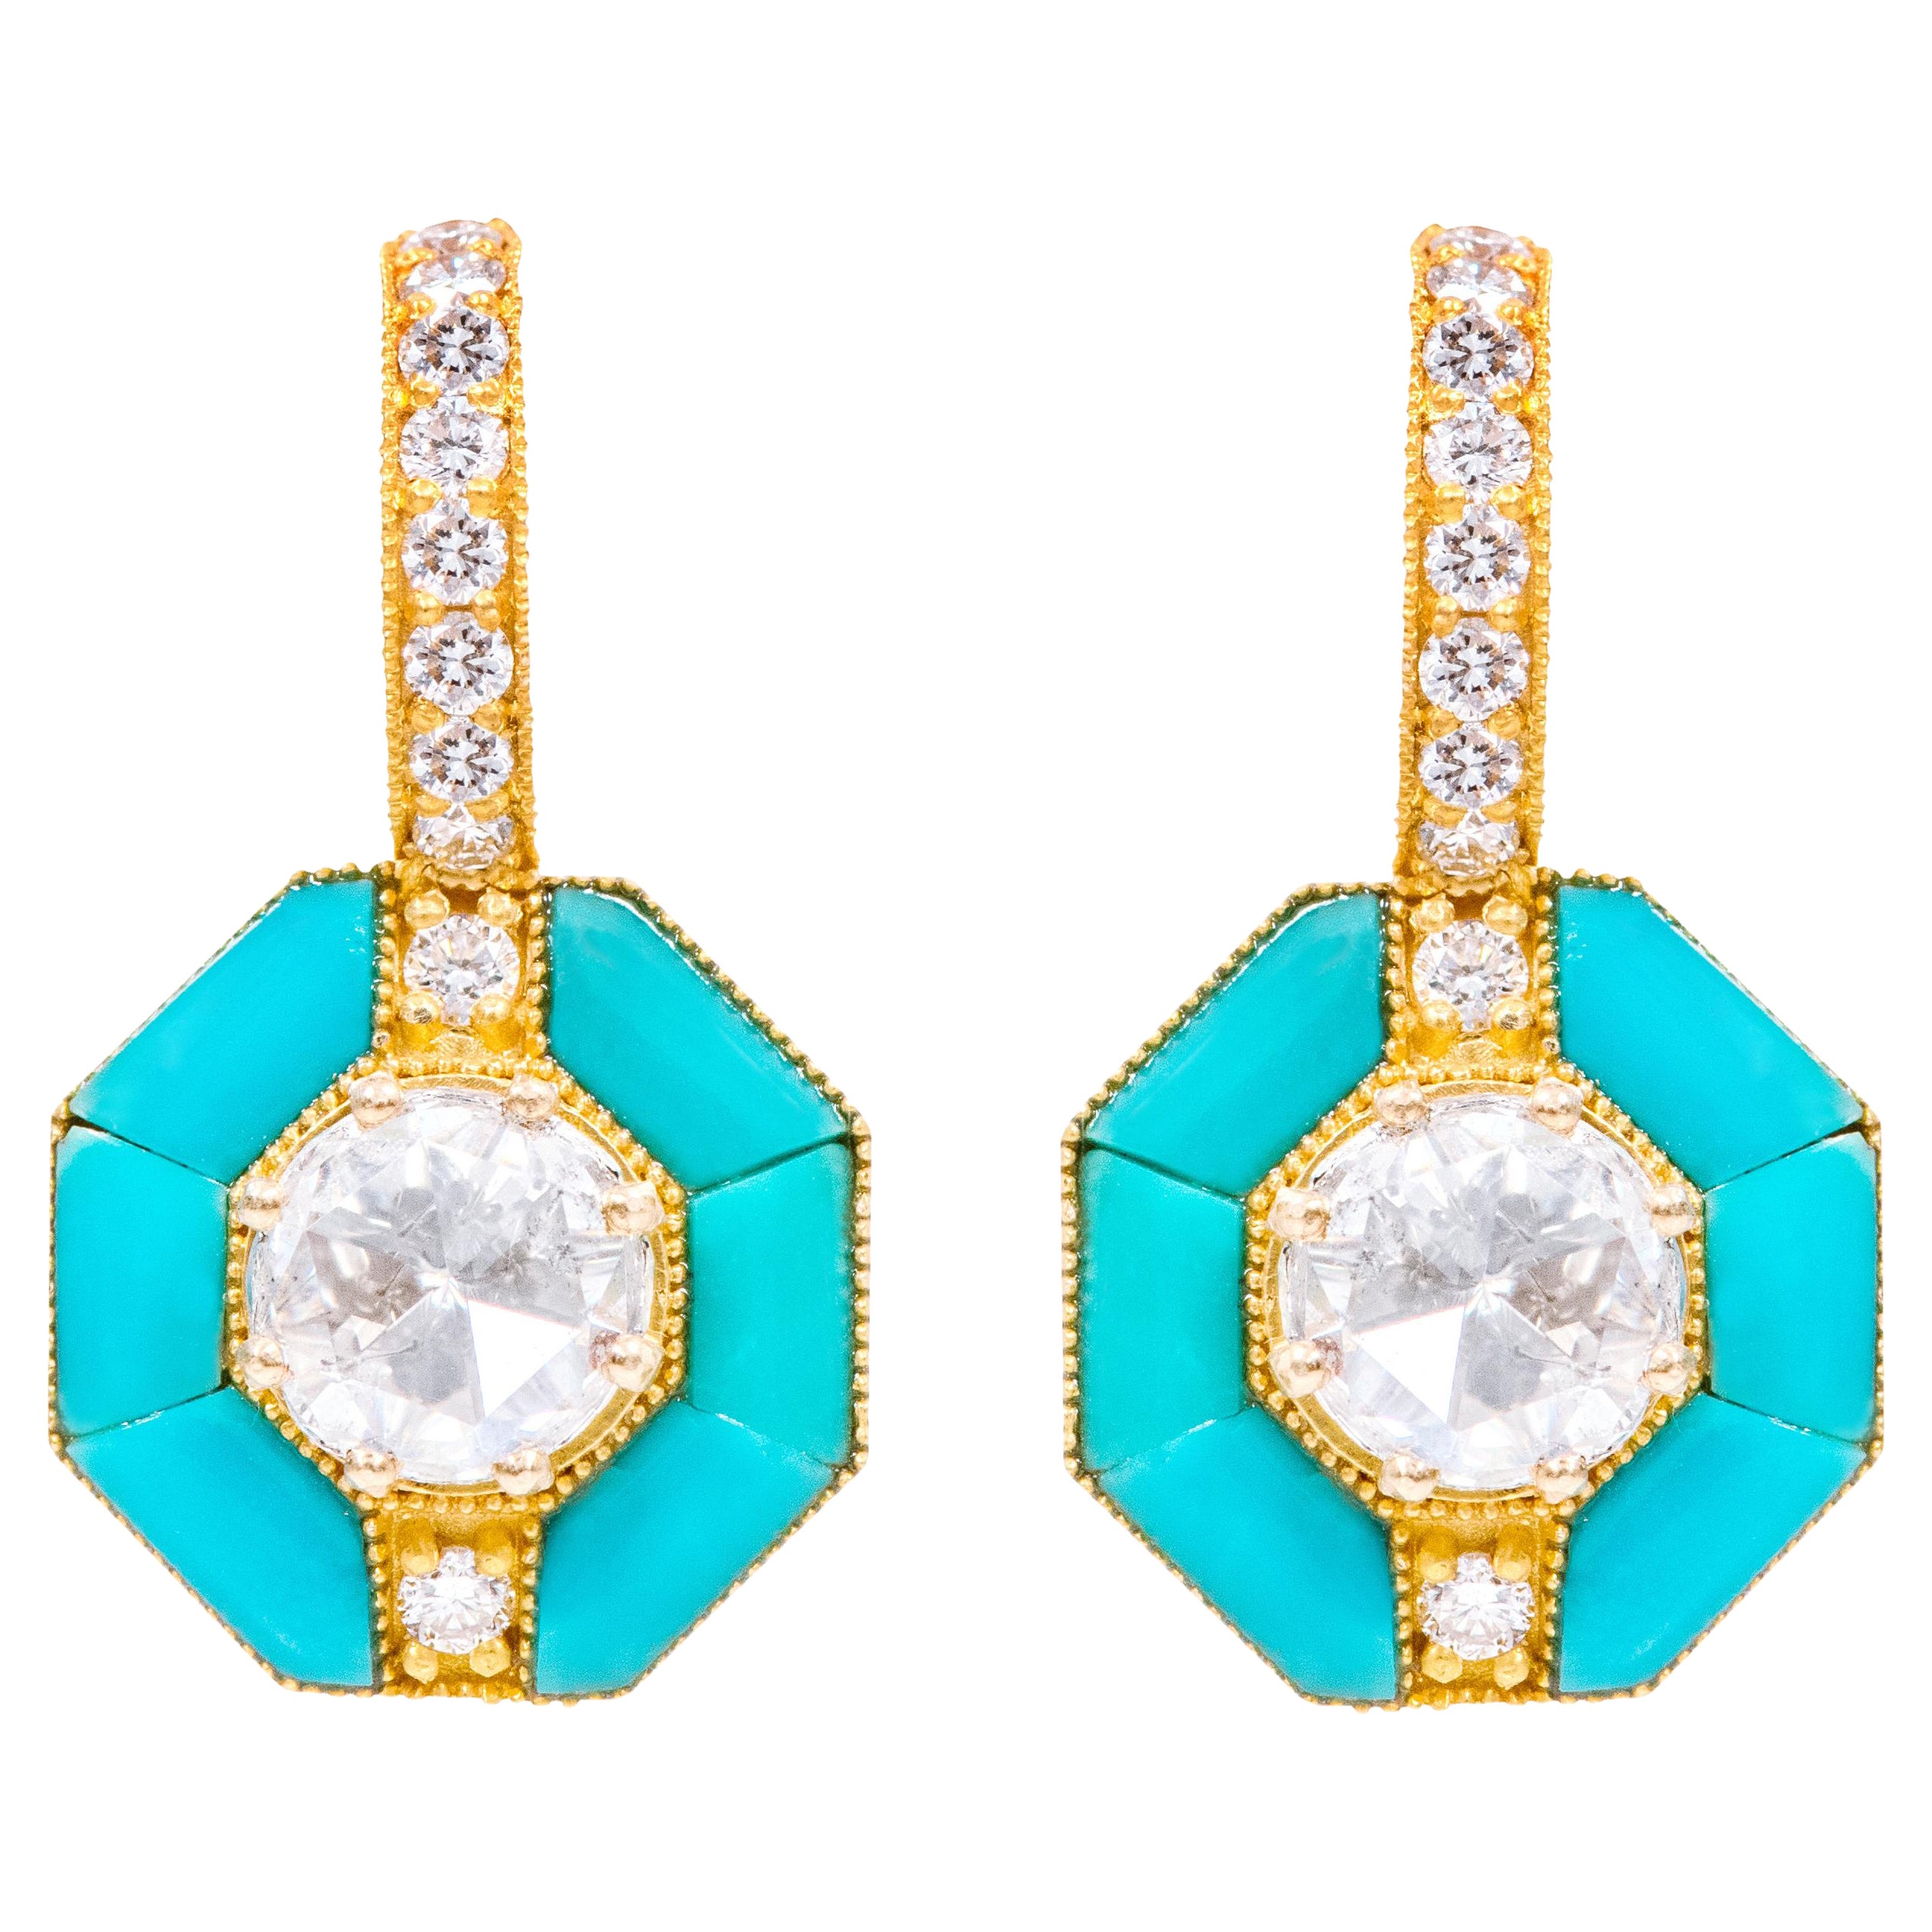 18 Karat Yellow Gold 3.55 Carat Solitaire Diamond and Turquoise Drop Earrings For Sale